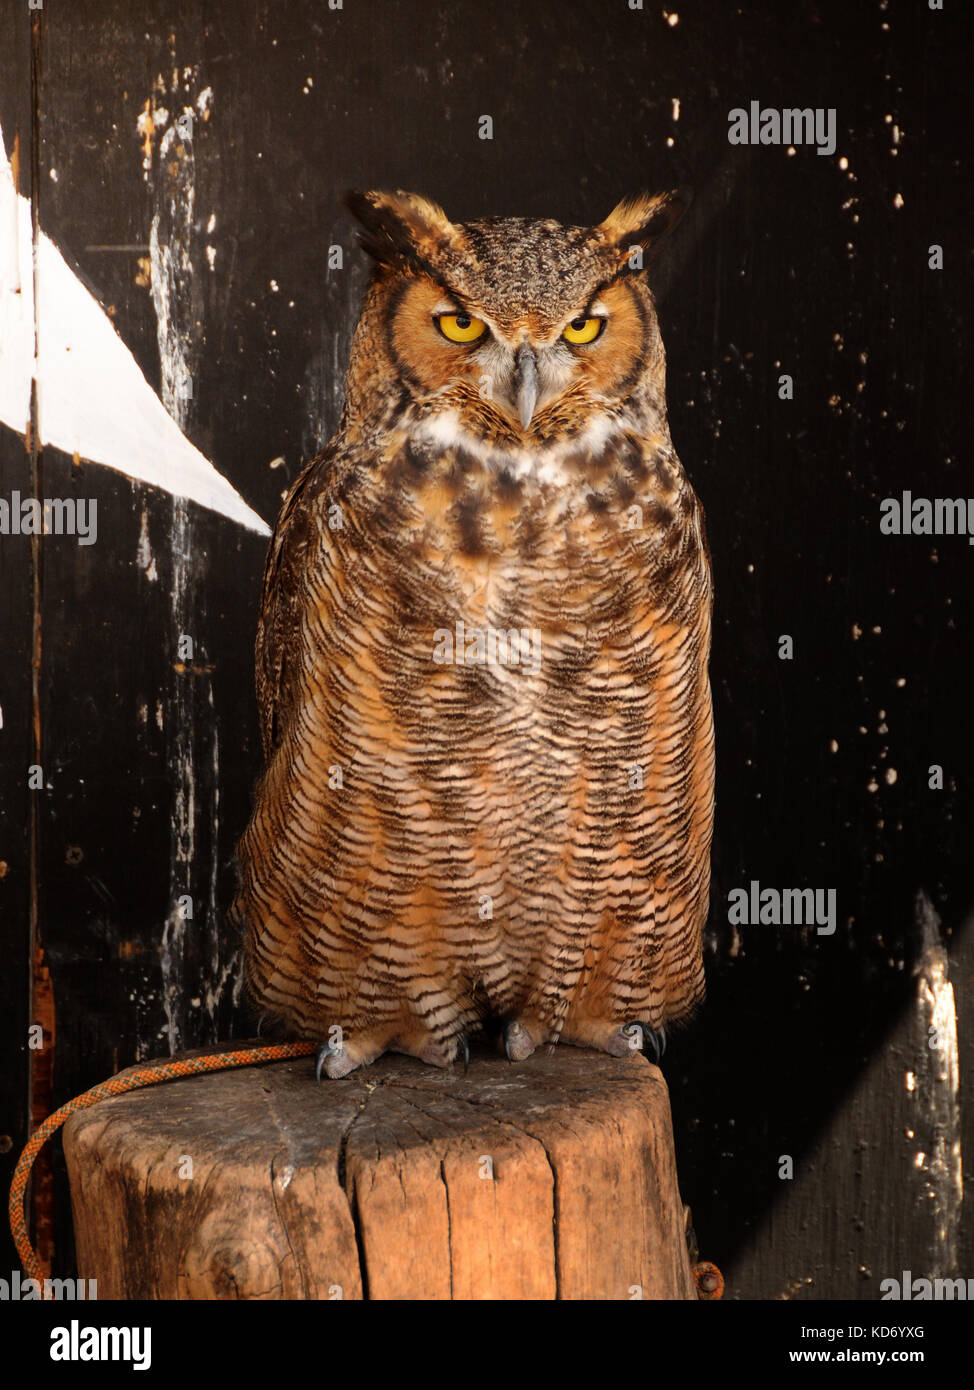 Barn owl front view living in captivity Stock Photo